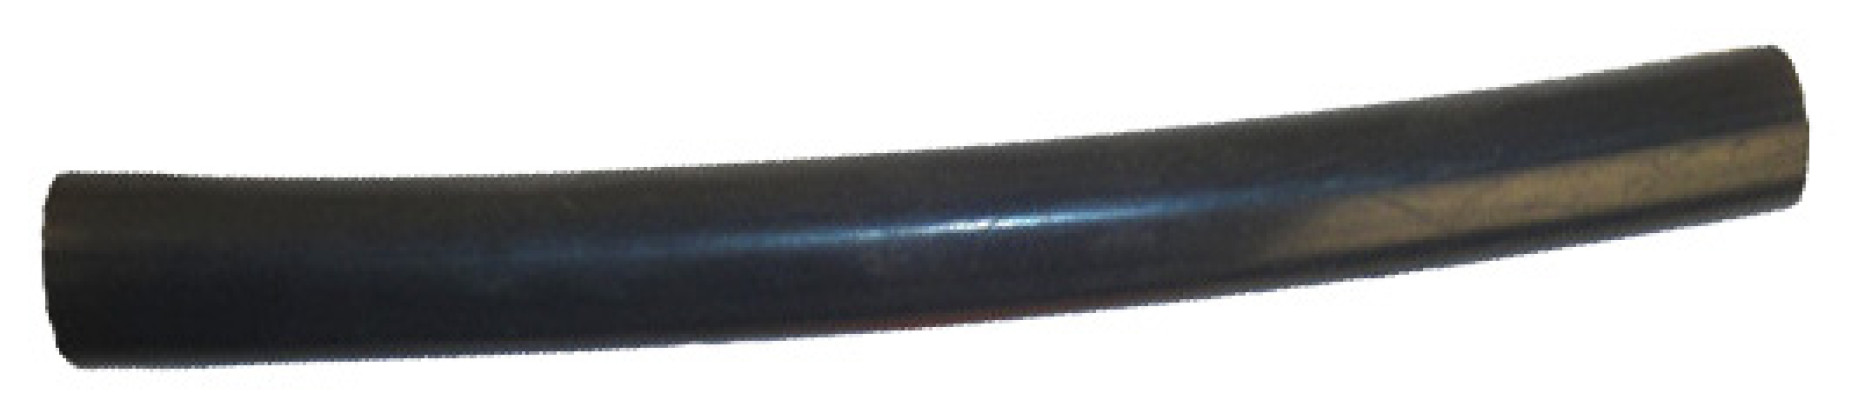 Image of A/C Compressor Clutch Connector from Sunair. Part number: PT-7022